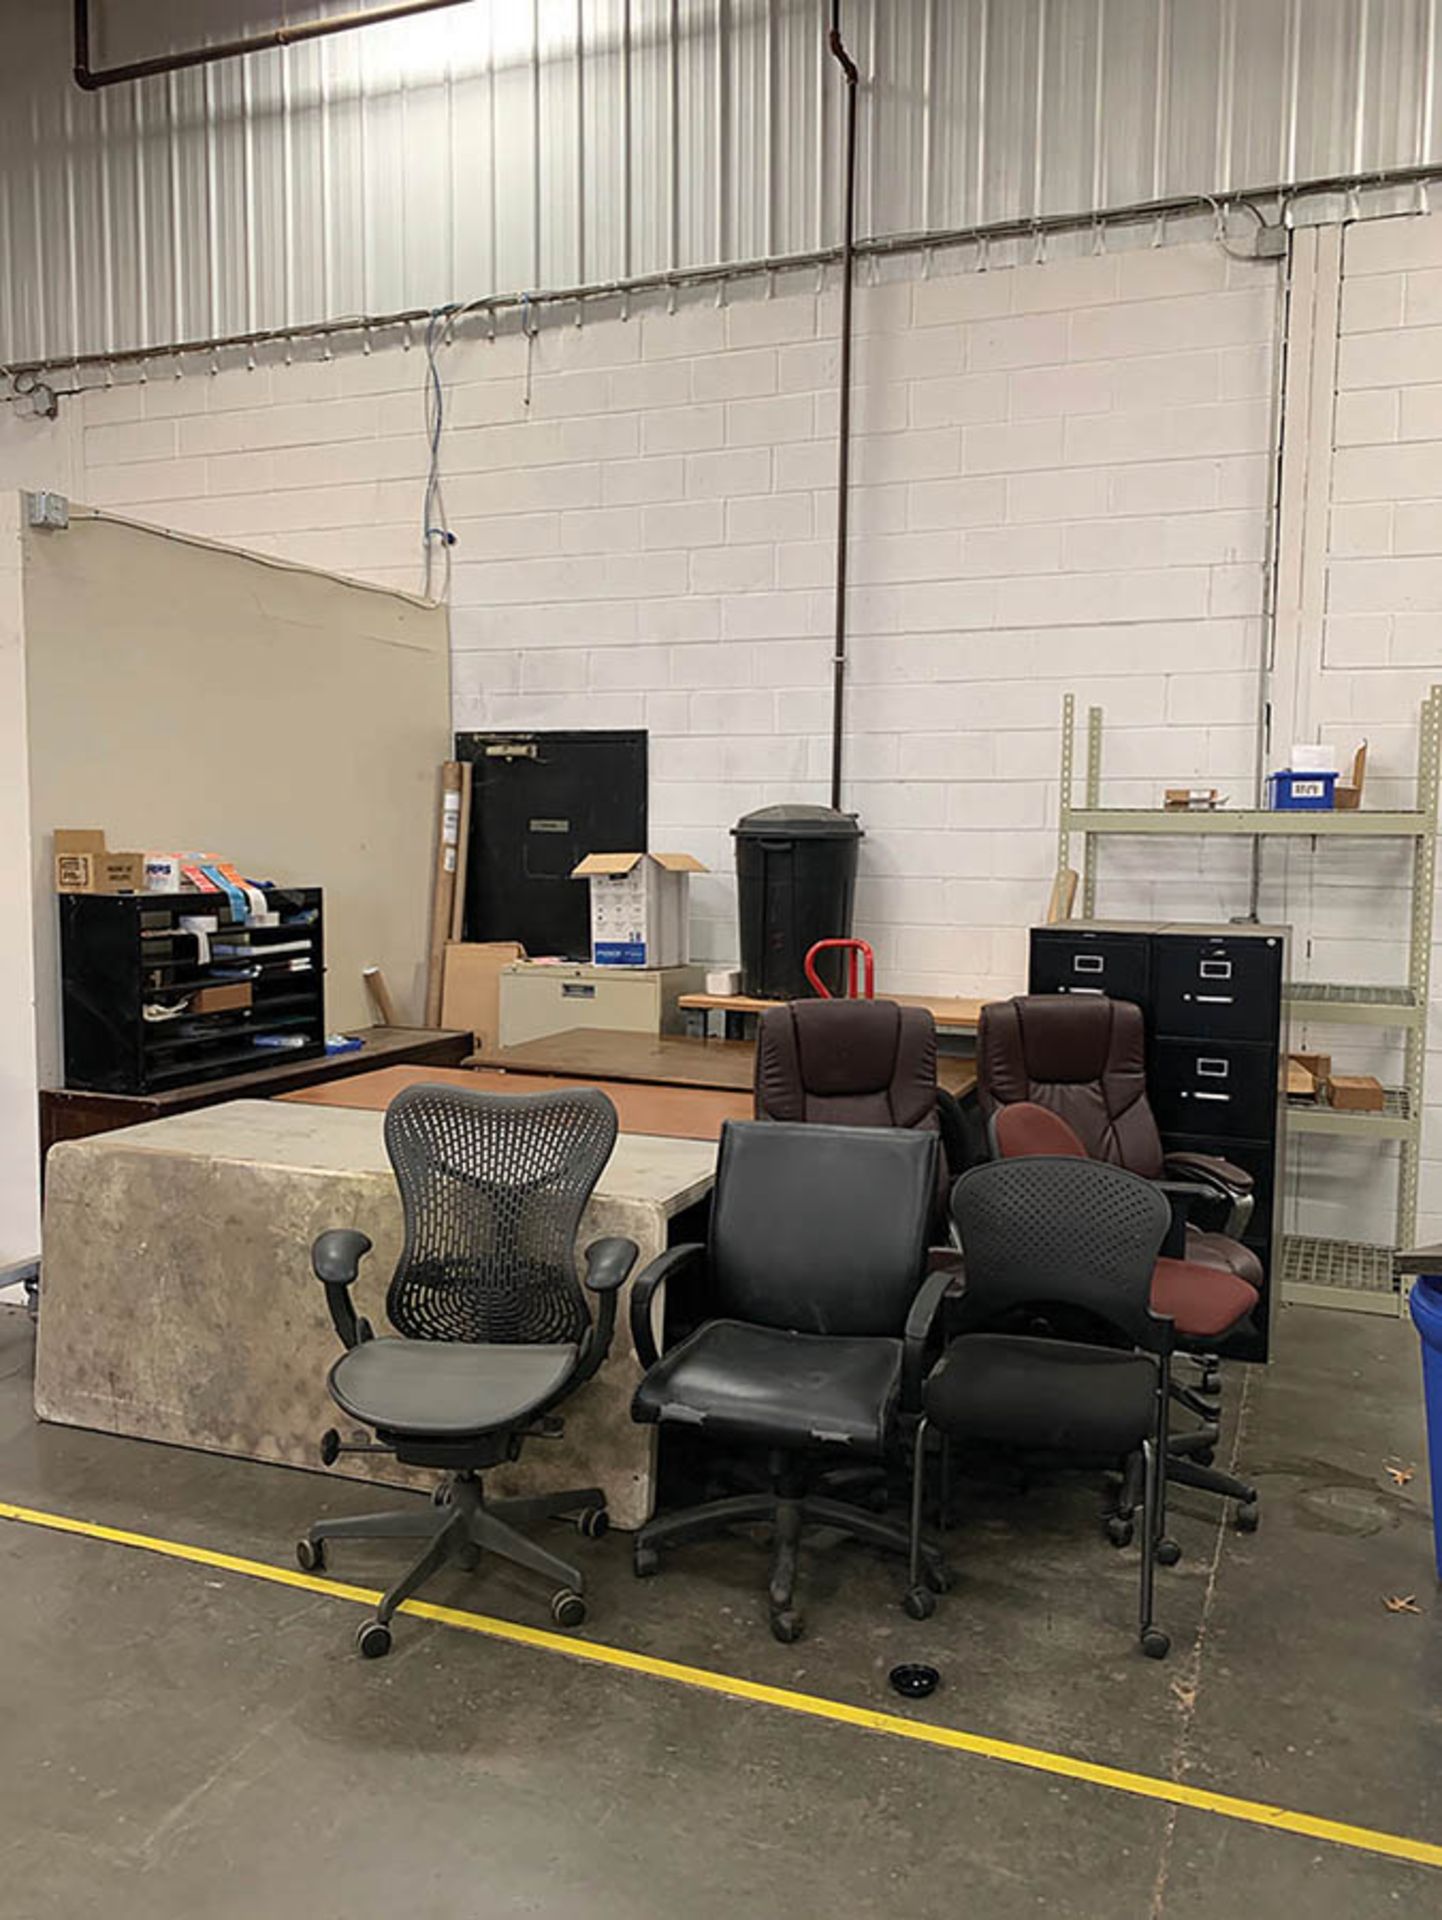 ASSORTED OFFICE FURNITURE IN SHOP, INCLUDING (9) CHAIRS, (7) DESKS, AND CABINETS